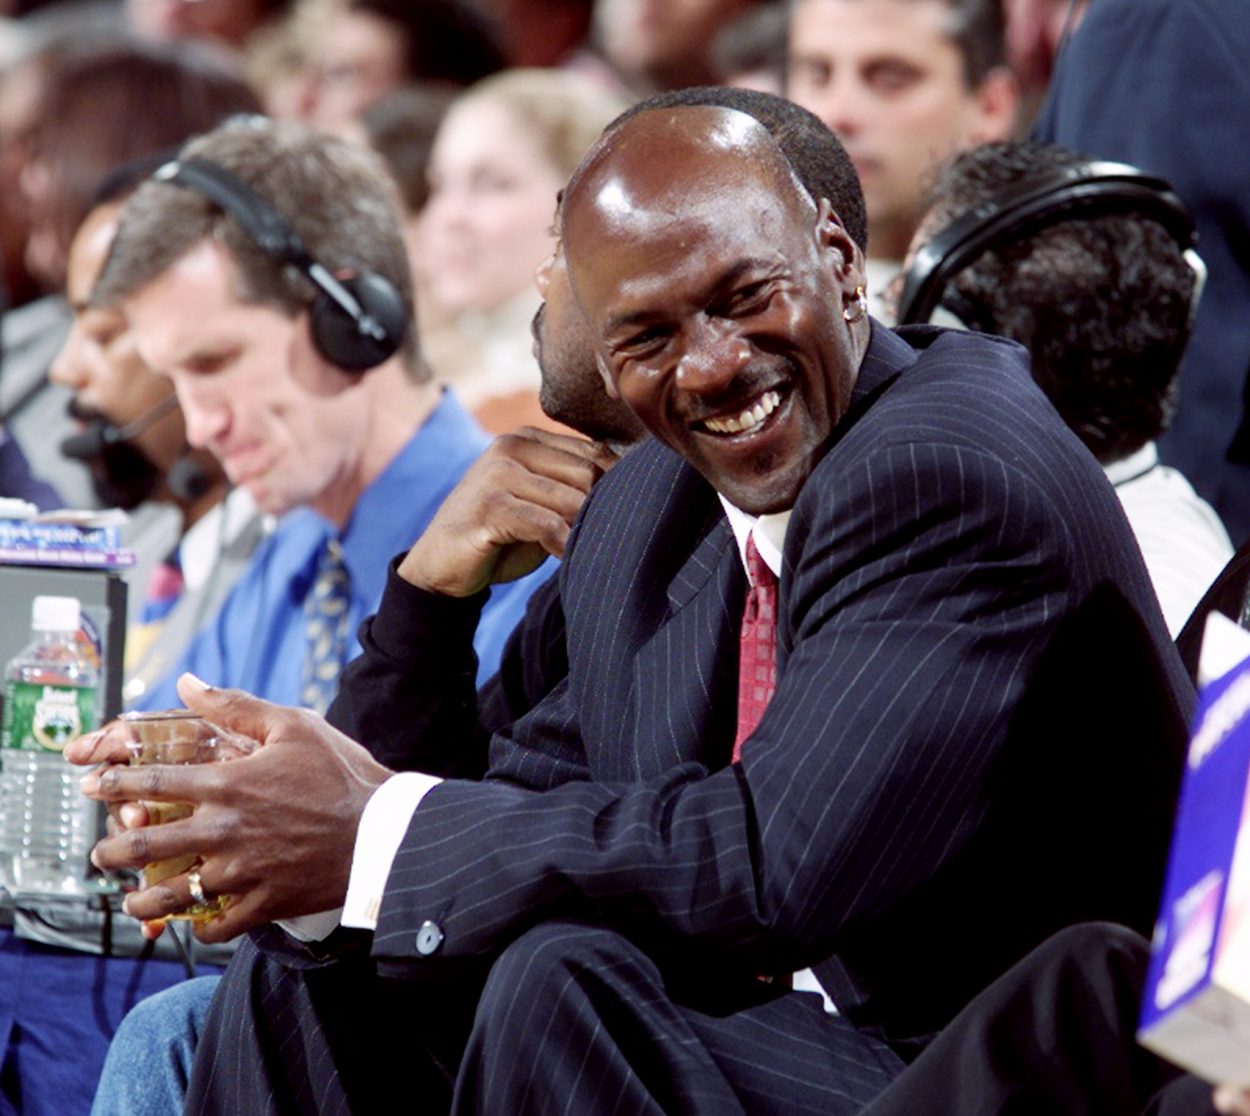 Bulls great Michael Jordan laughs while taking in a game at Madison Square Garden